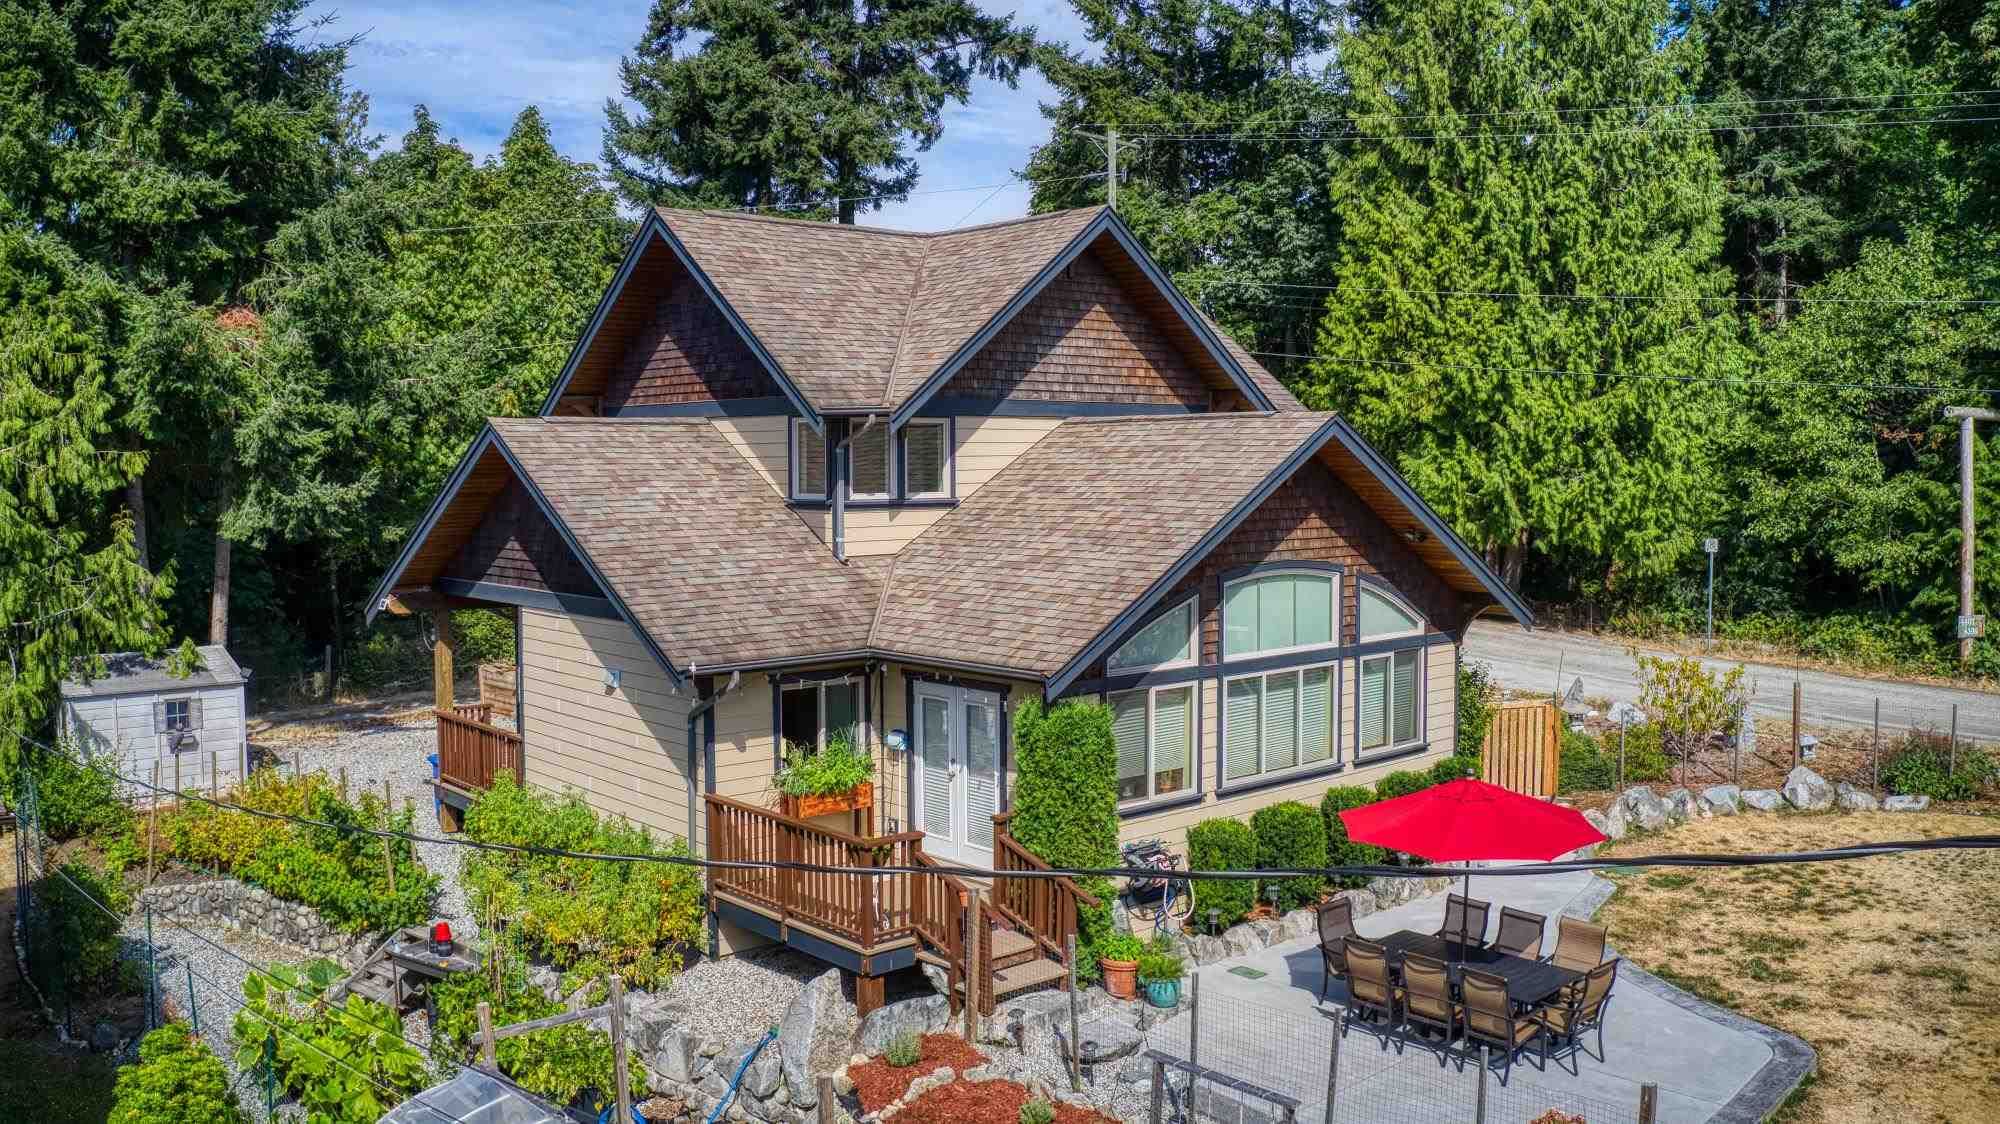 I have sold a property at 4399 GUN CLUB RD in Sechelt
